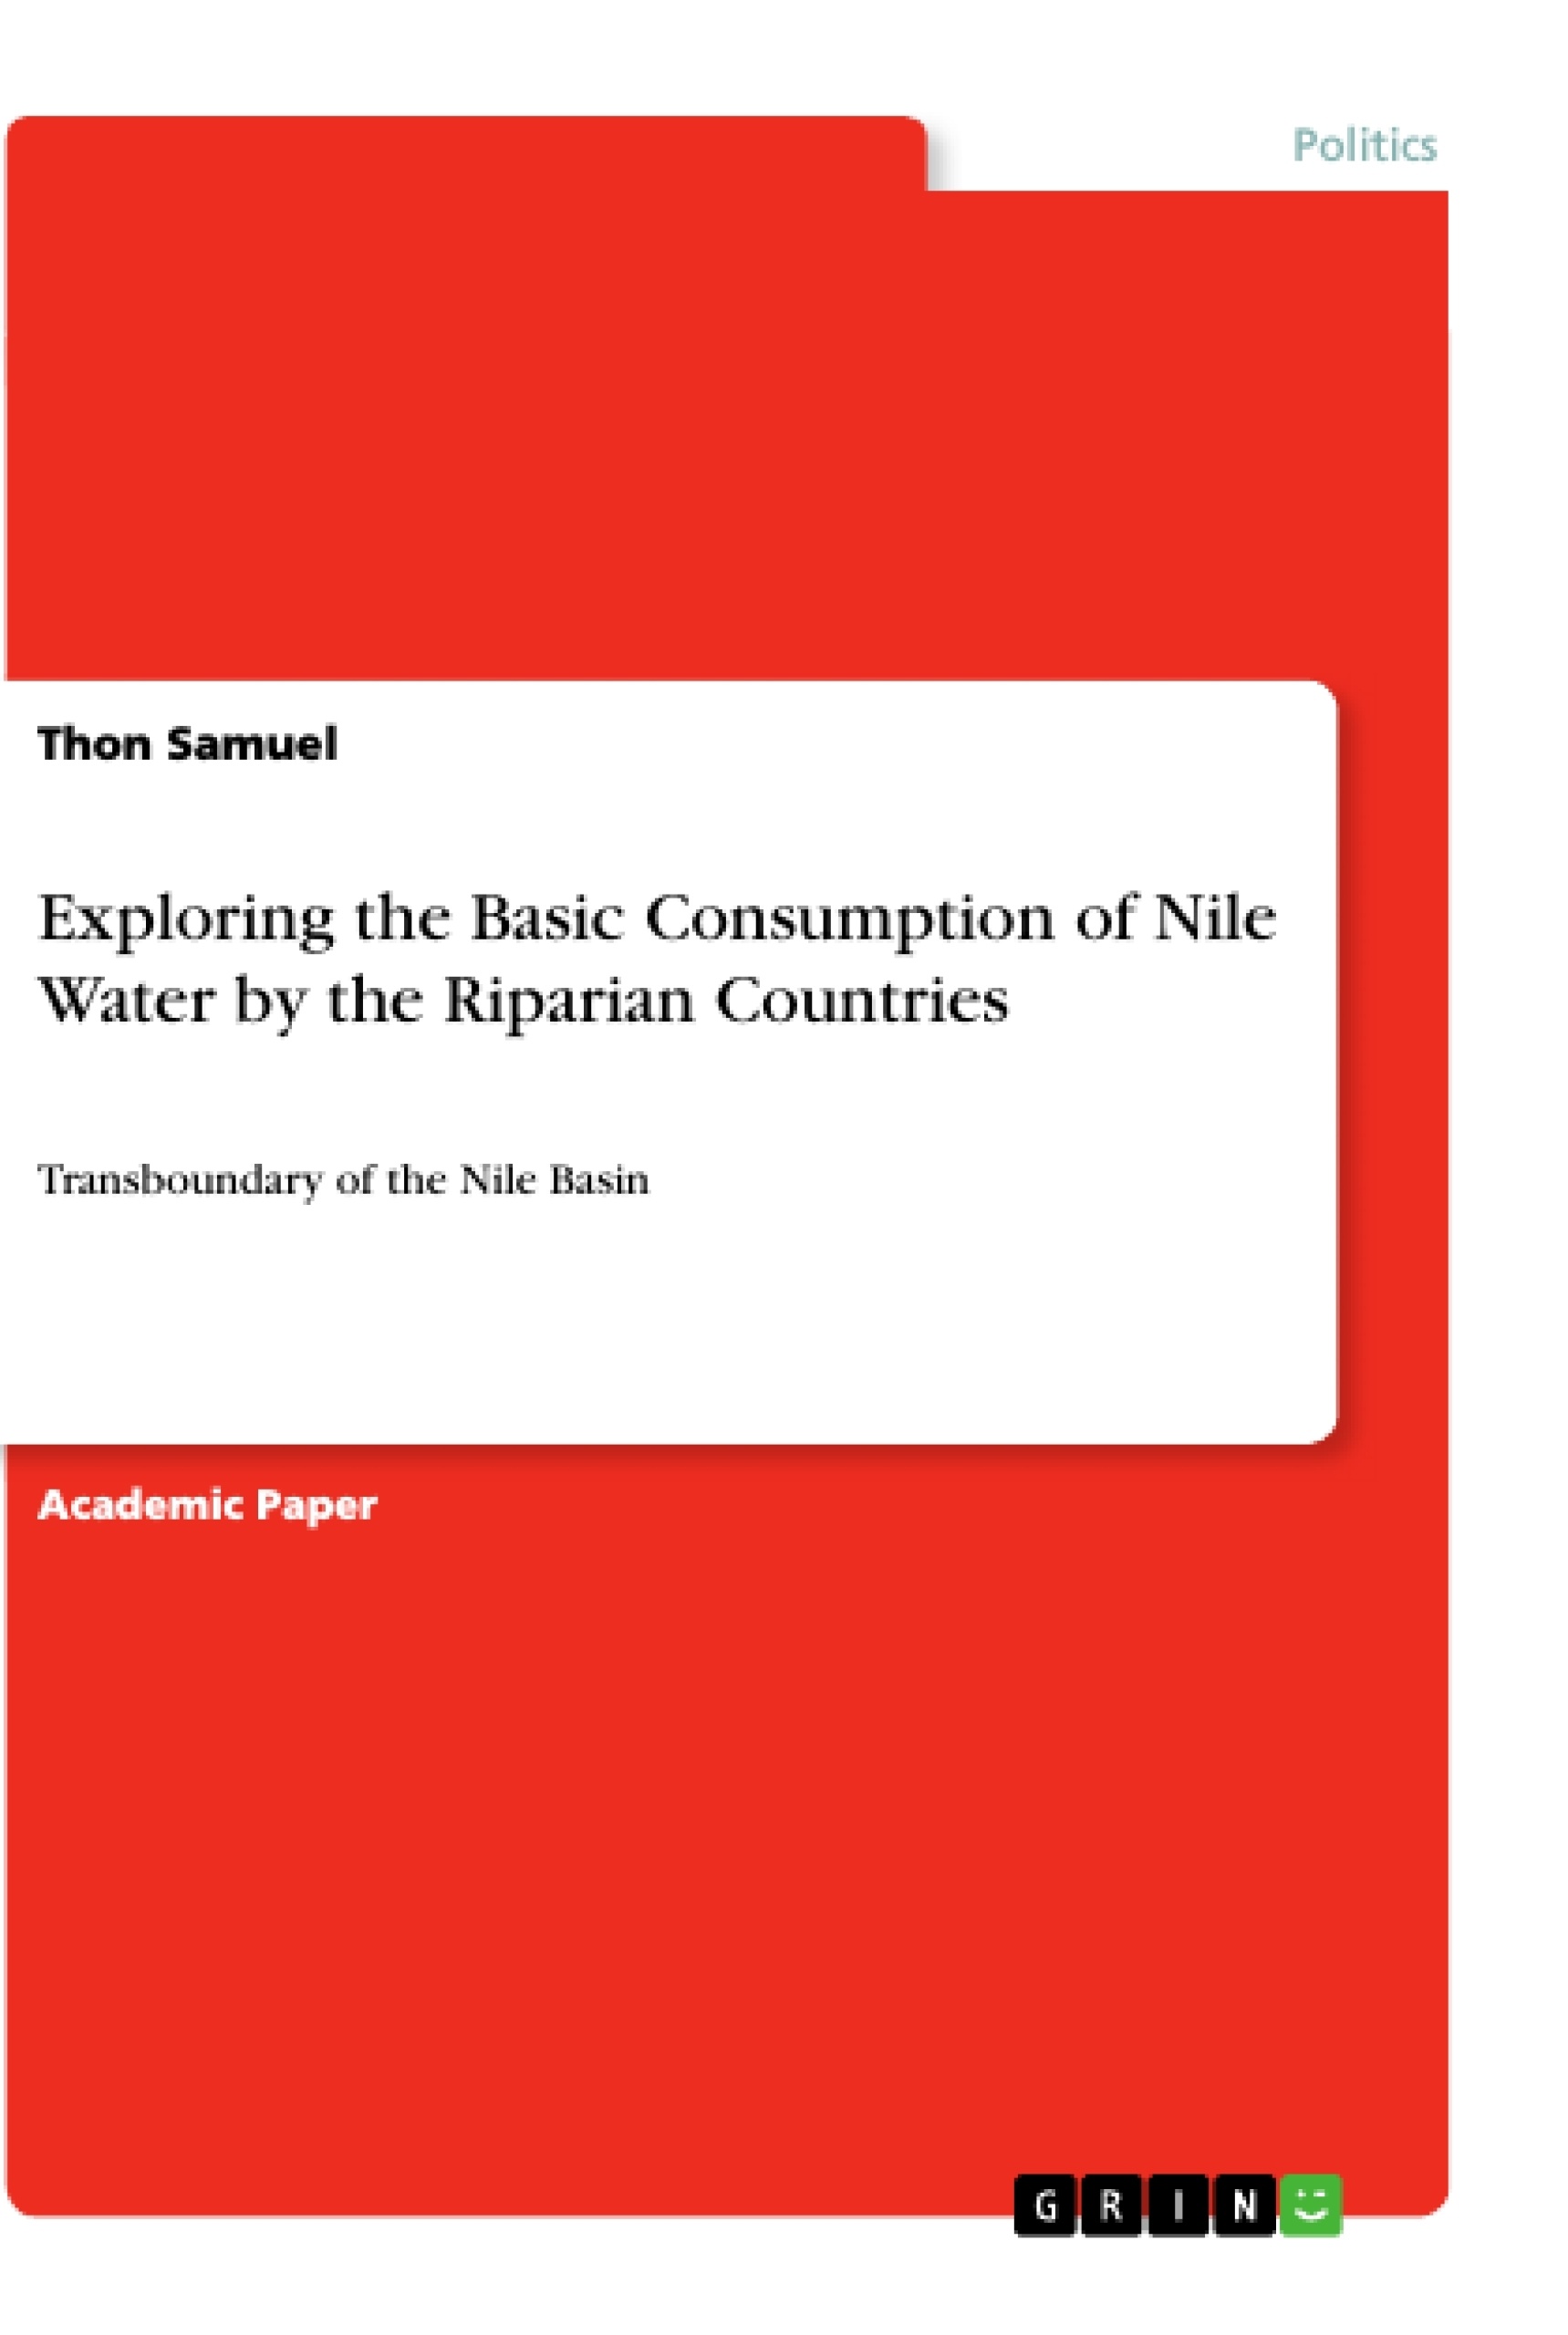 Title: Exploring the Basic Consumption of Nile Water by the Riparian Countries